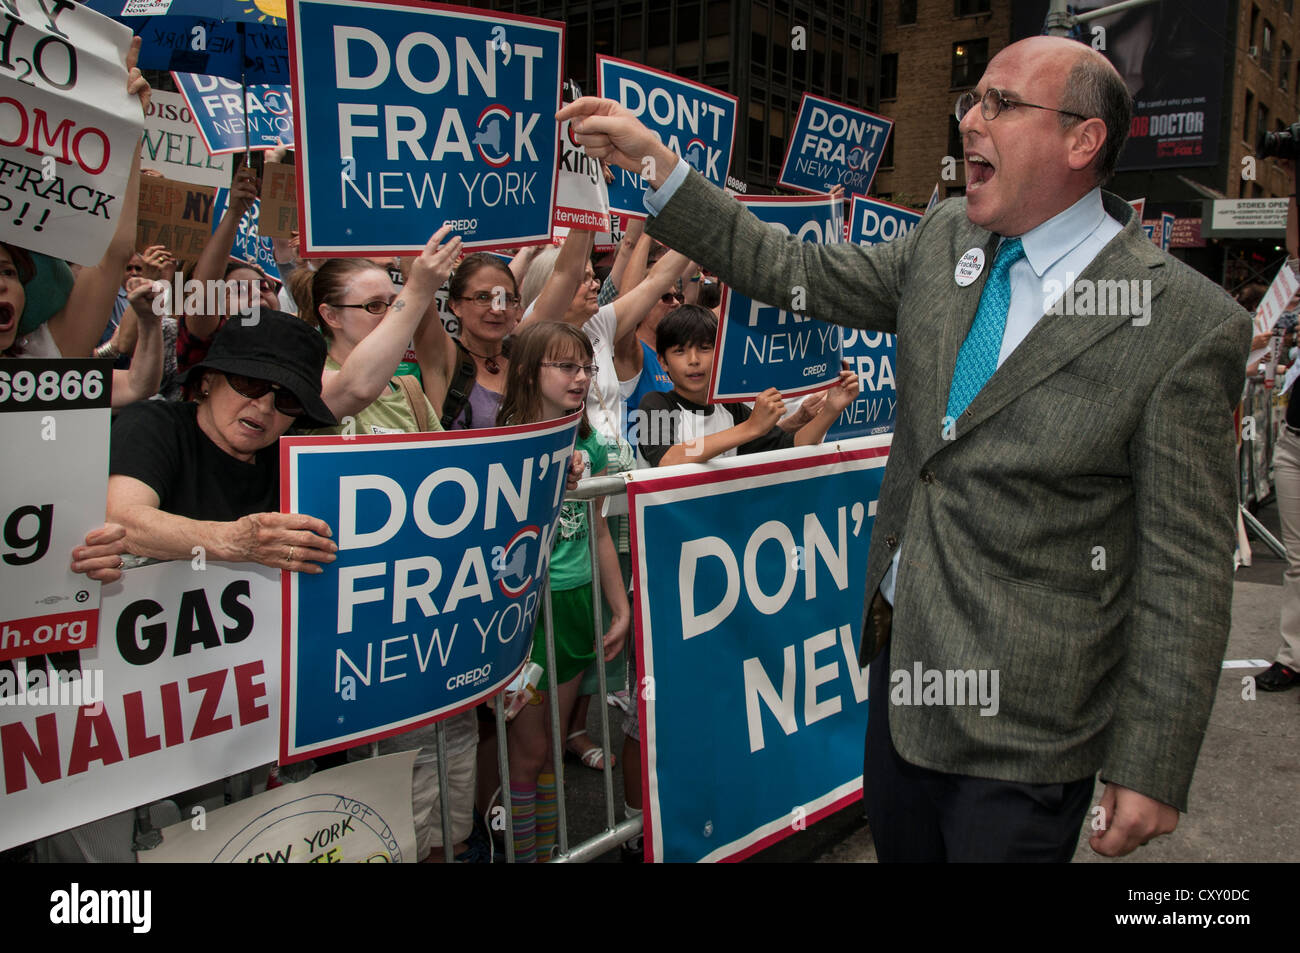 David Braun (right) encourages demonstrators in a Manhattan protest against fracking for natural gas in New York outside NY Governor Cuomo's hotel. Stock Photo